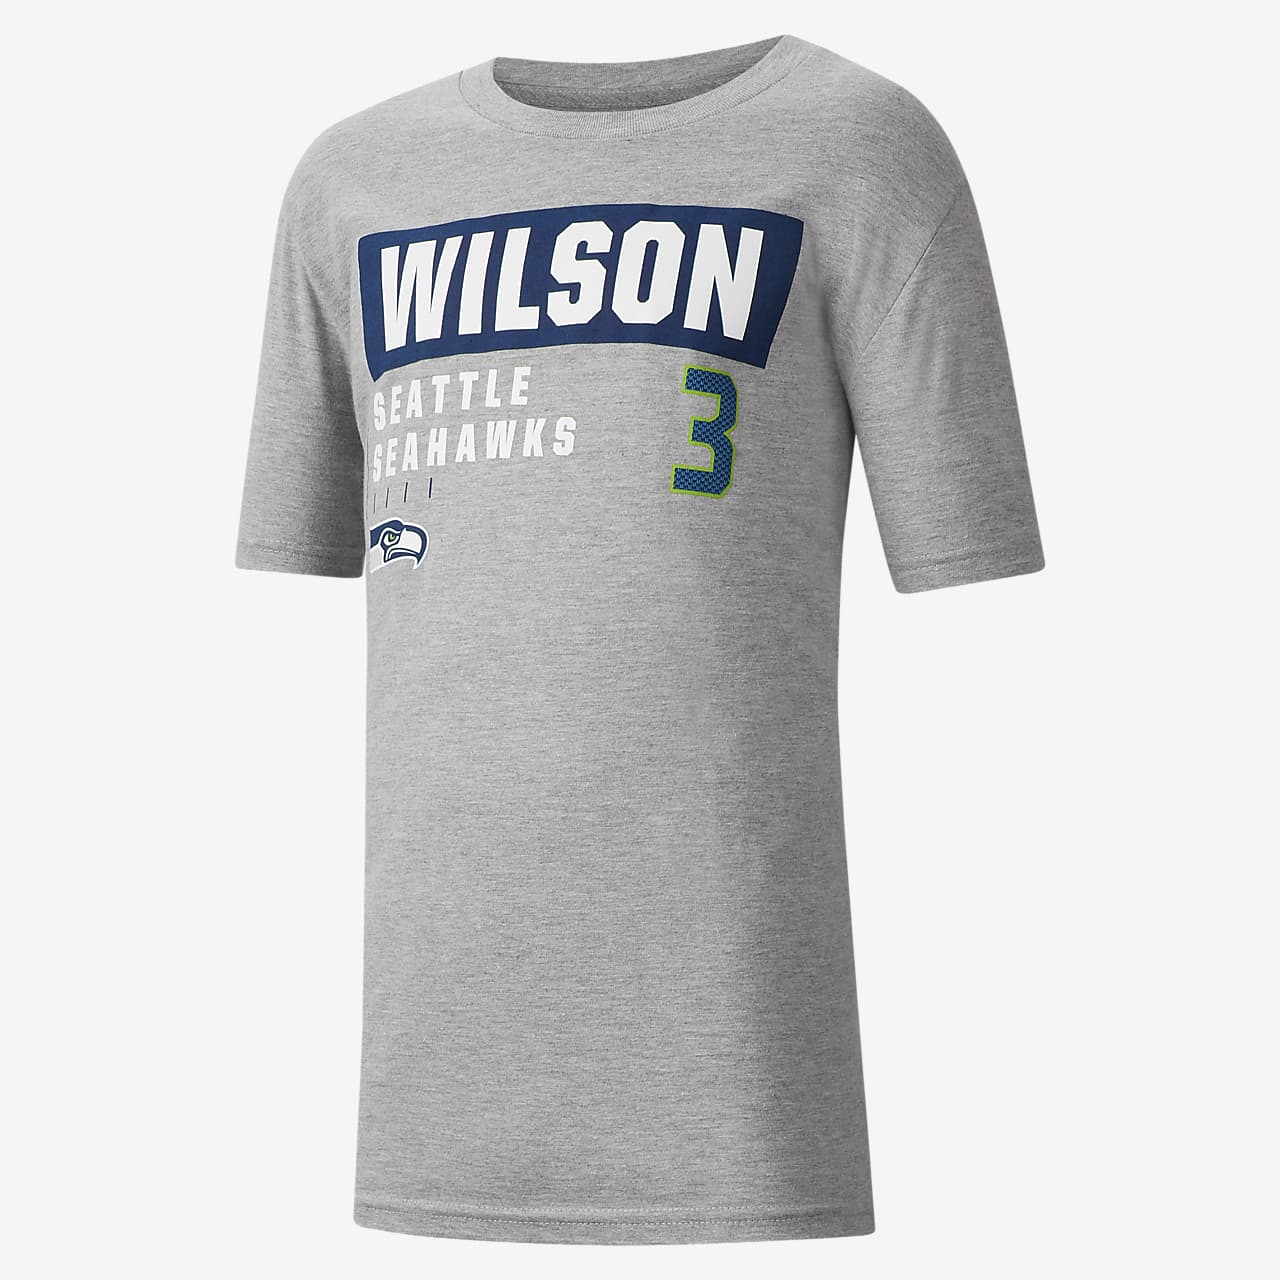 seattle seahawks t shirts for toddlers